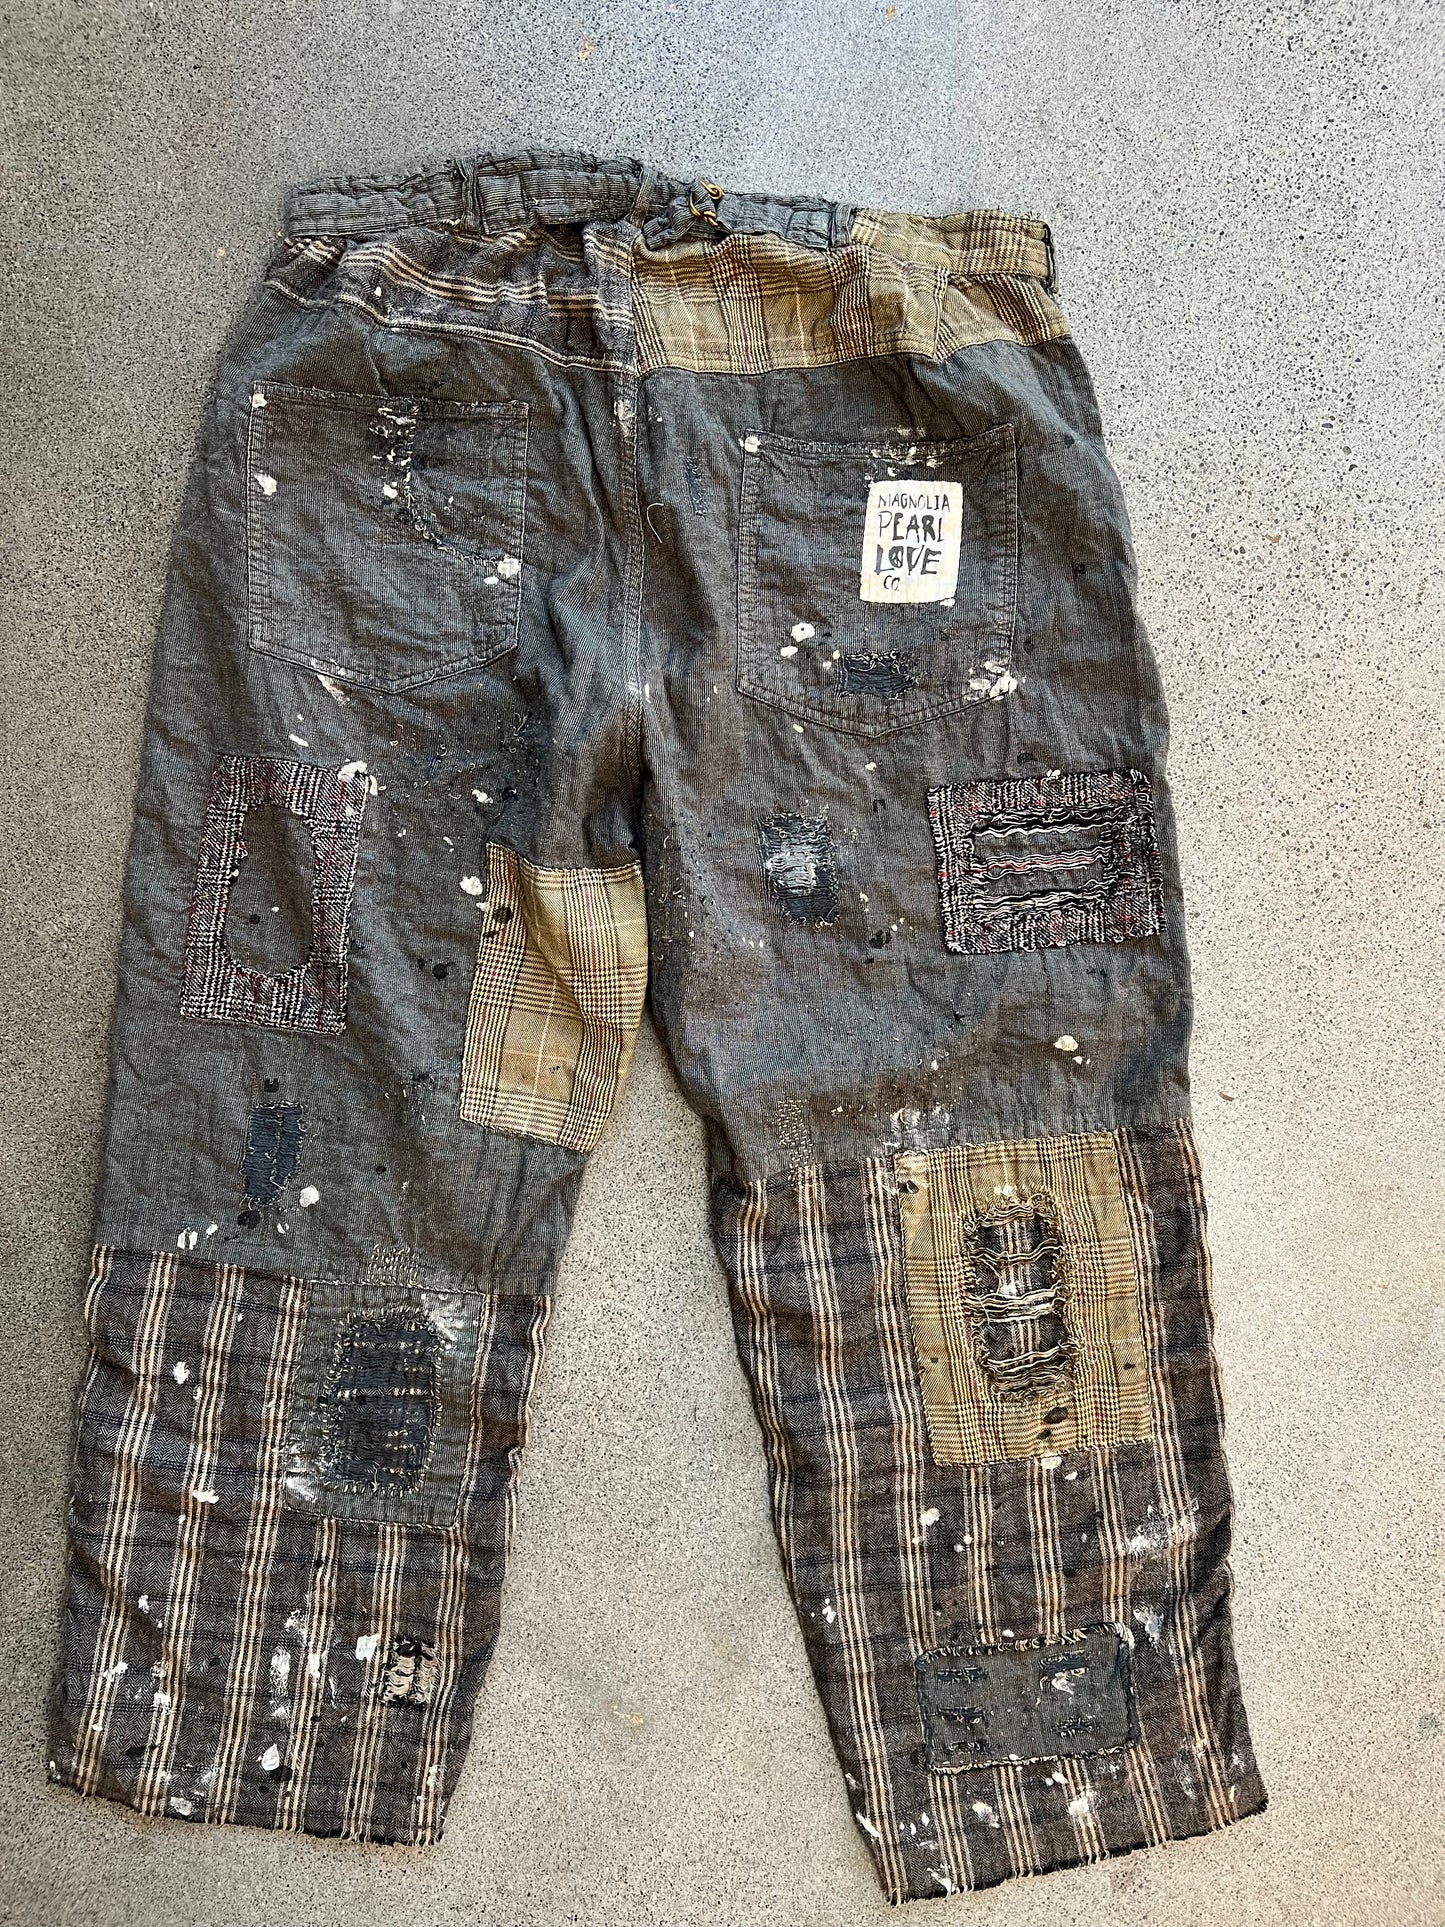 Magnolia Pearl Patch Minors Pants